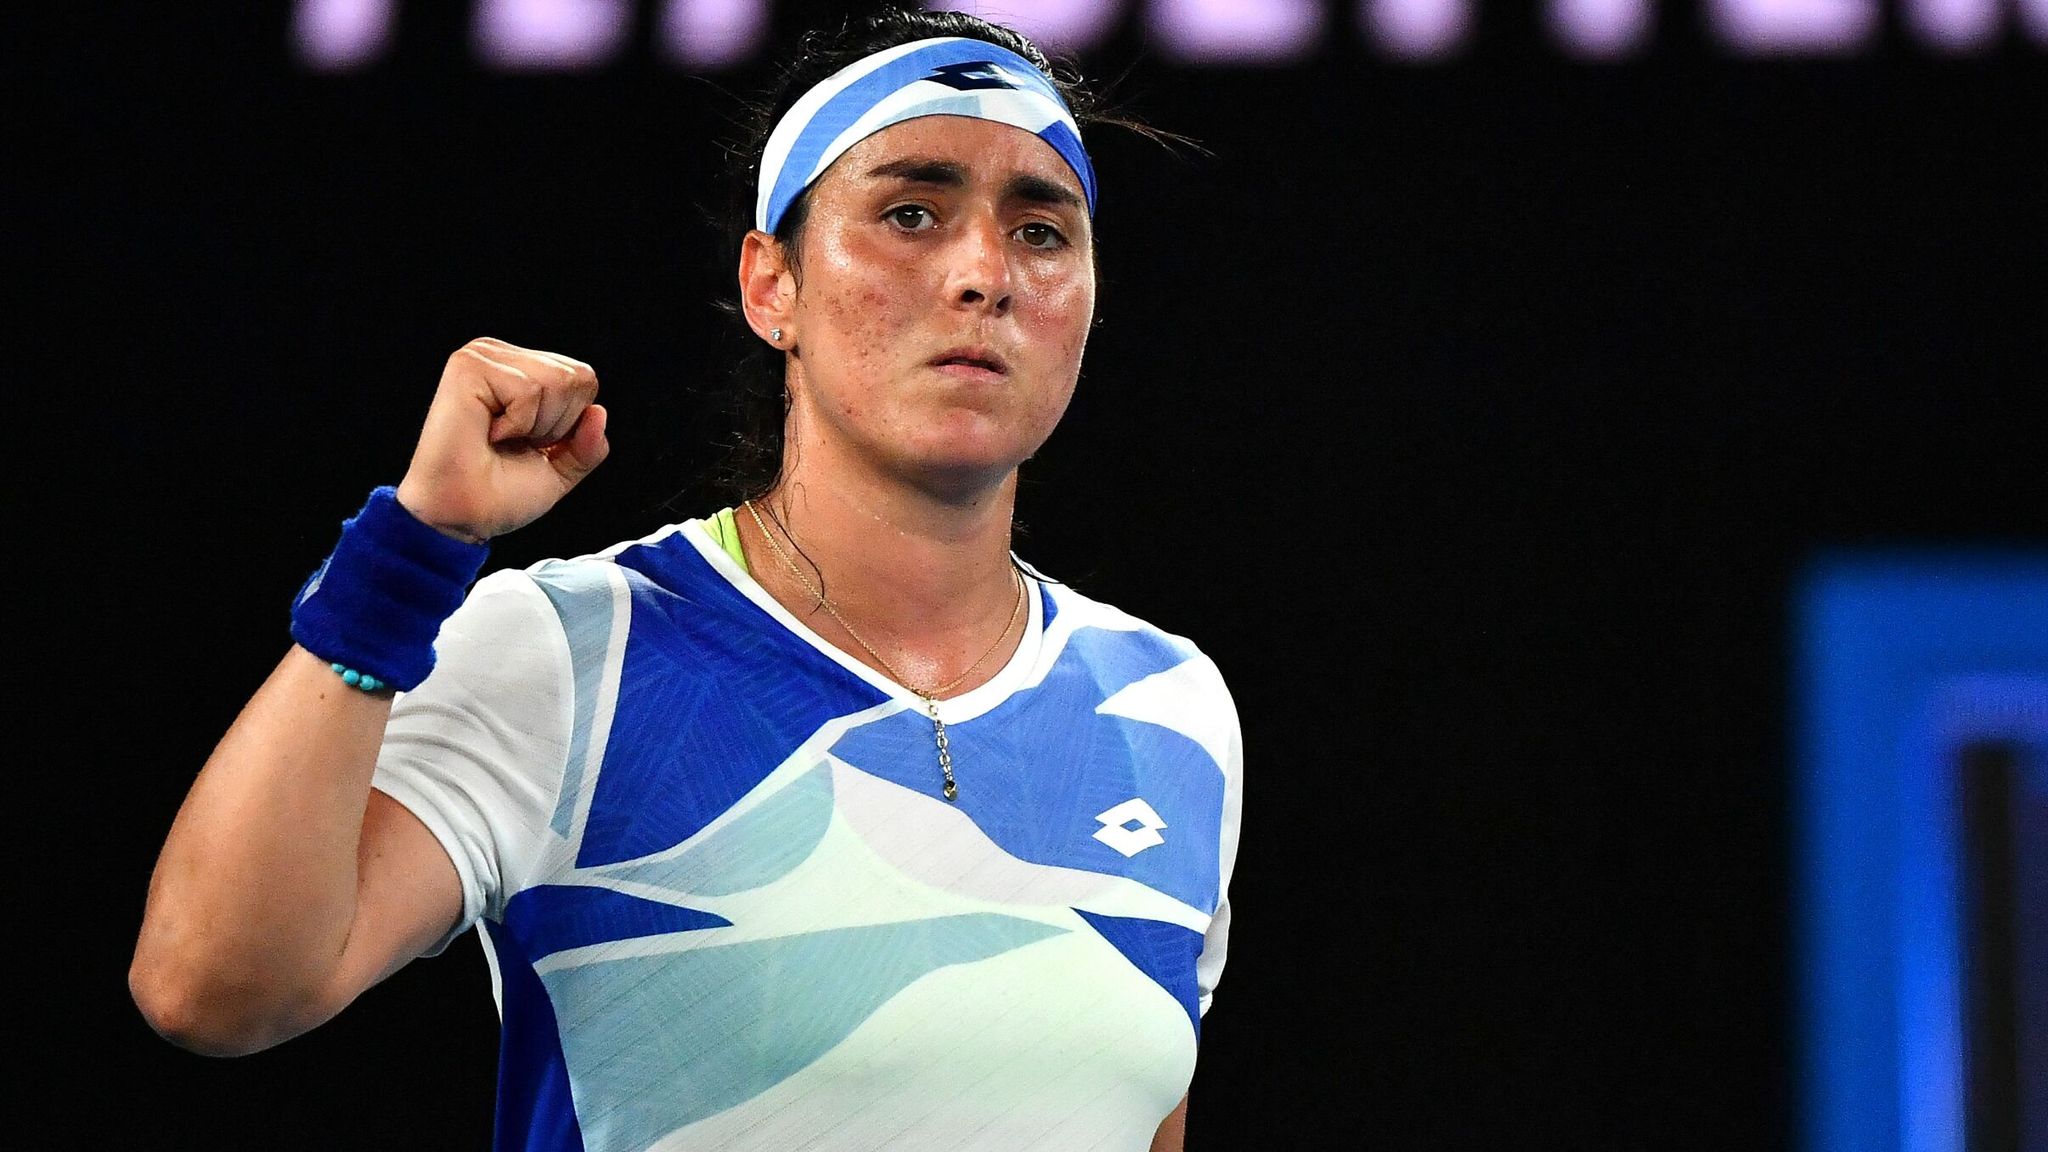 Australian Open Ons Jabeur rallies to victory in Melbourne as Caroline Garcia and Aryna Sabalenka also advance Tennis News Sky Sports